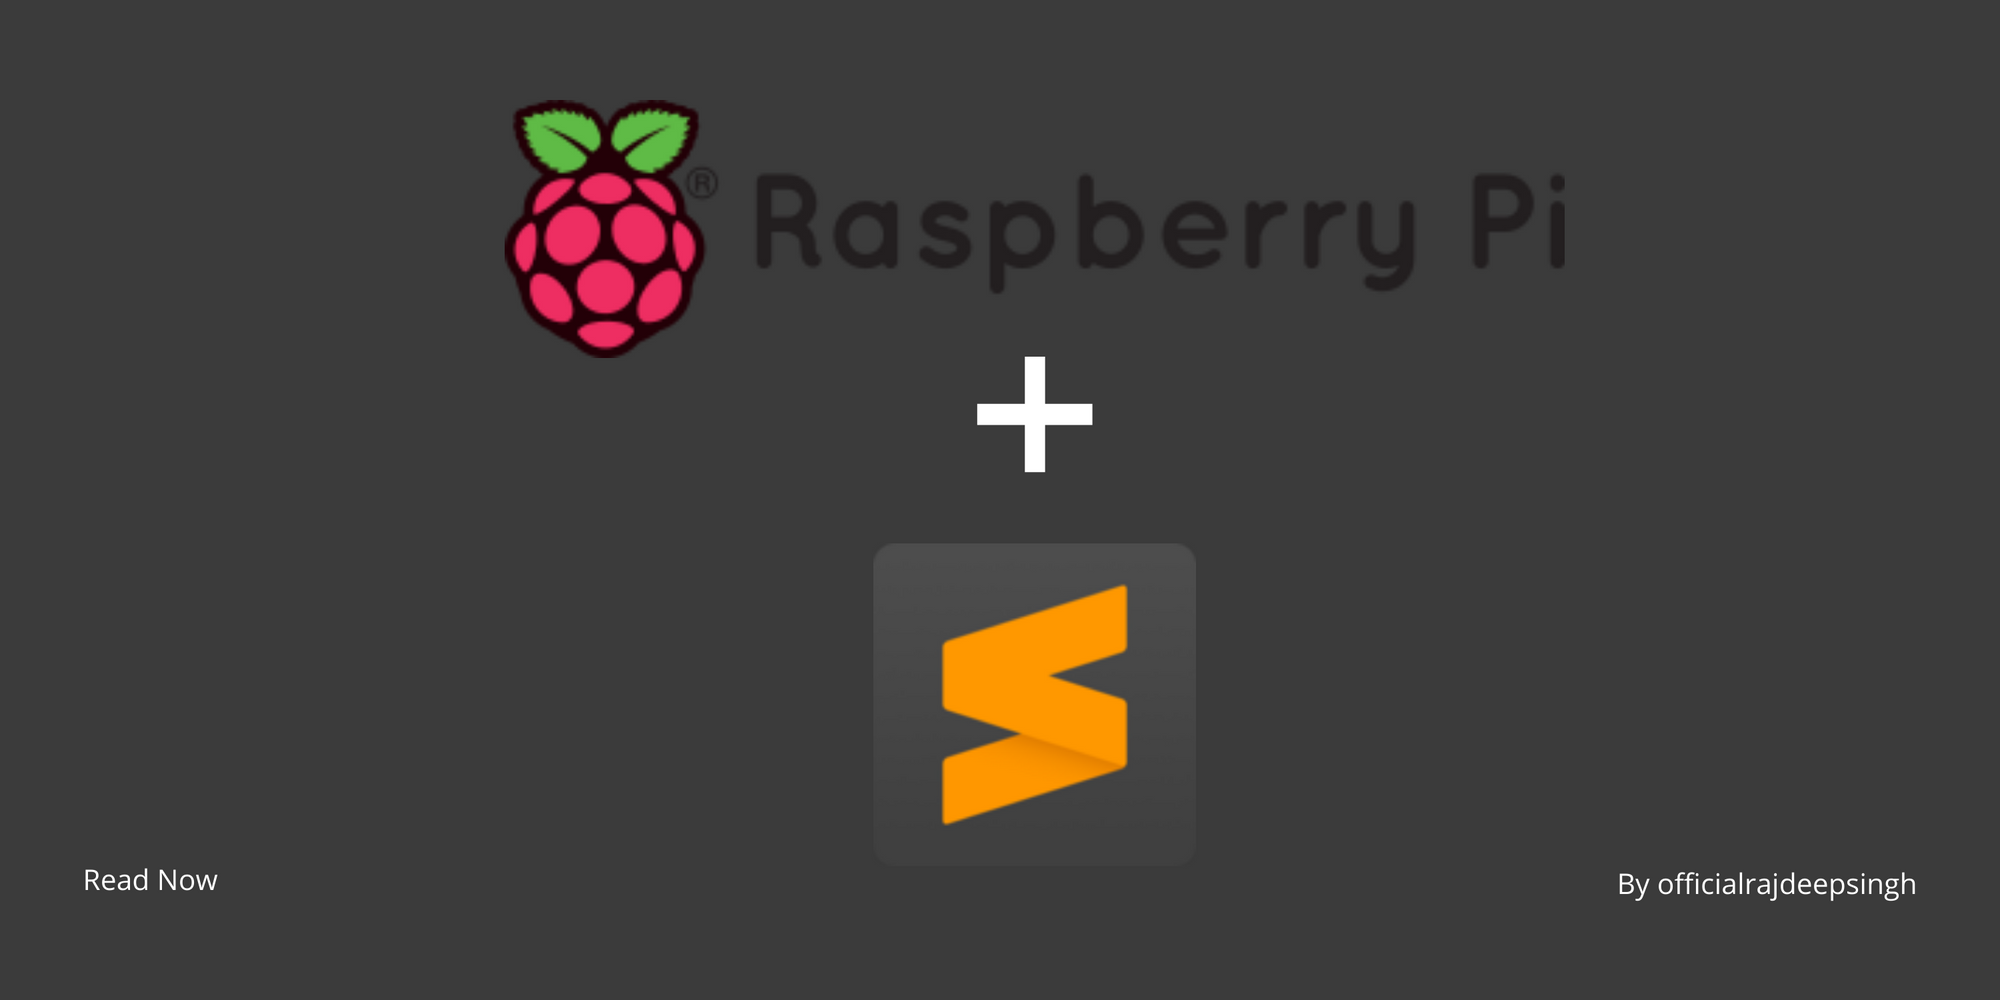 How to install sublime text IDE in Raspberry pi 4?